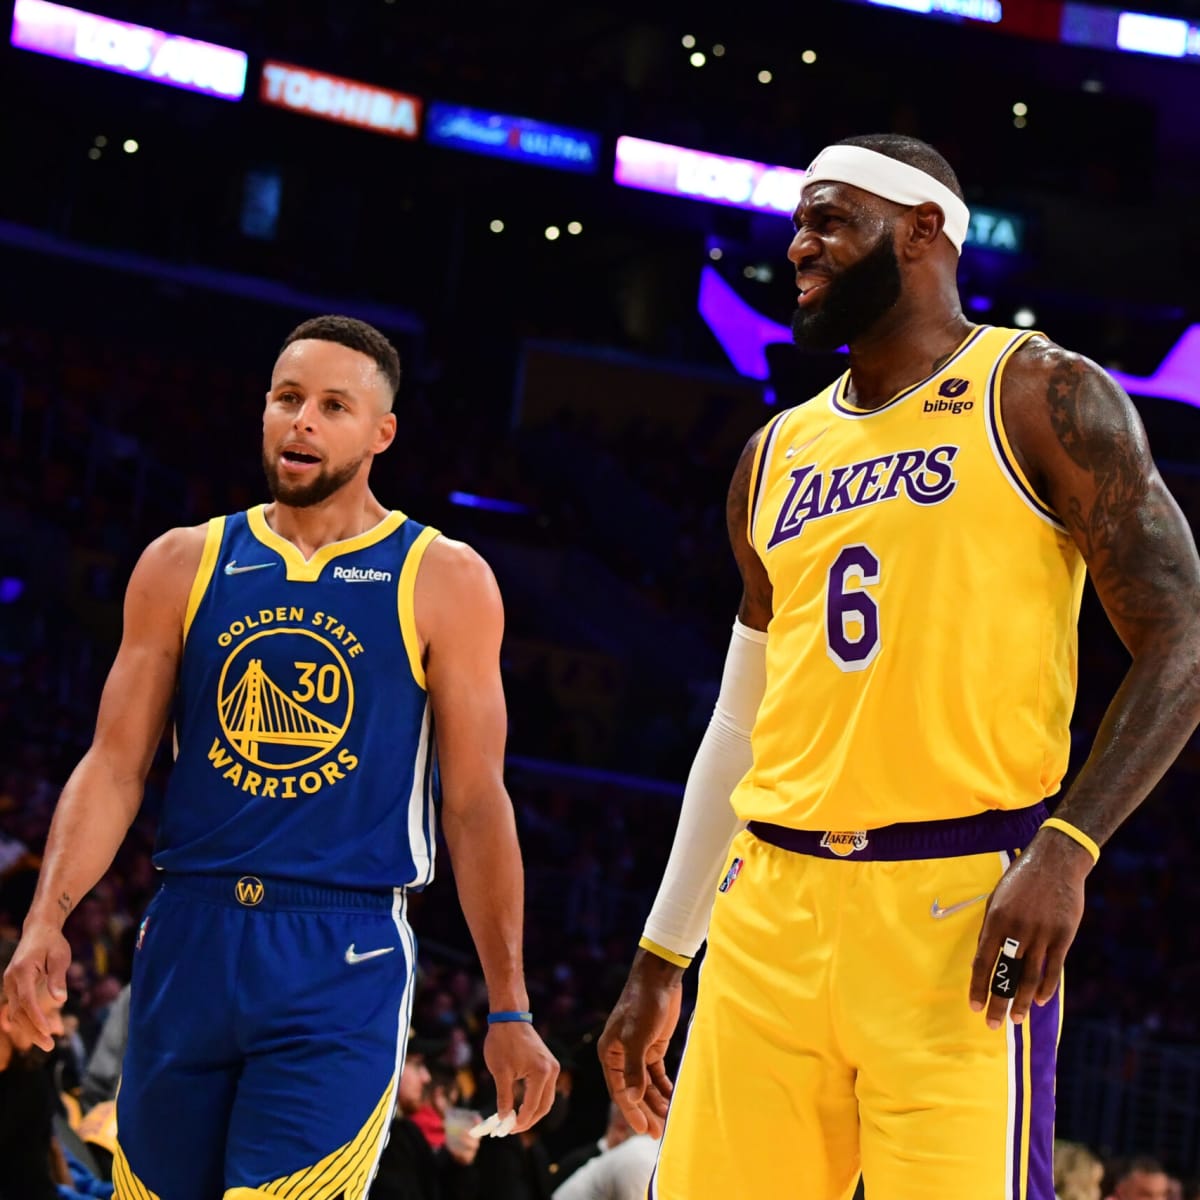 LeBron James, Steph Curry Top Forbes’ List of Highest-Paid NBA Players